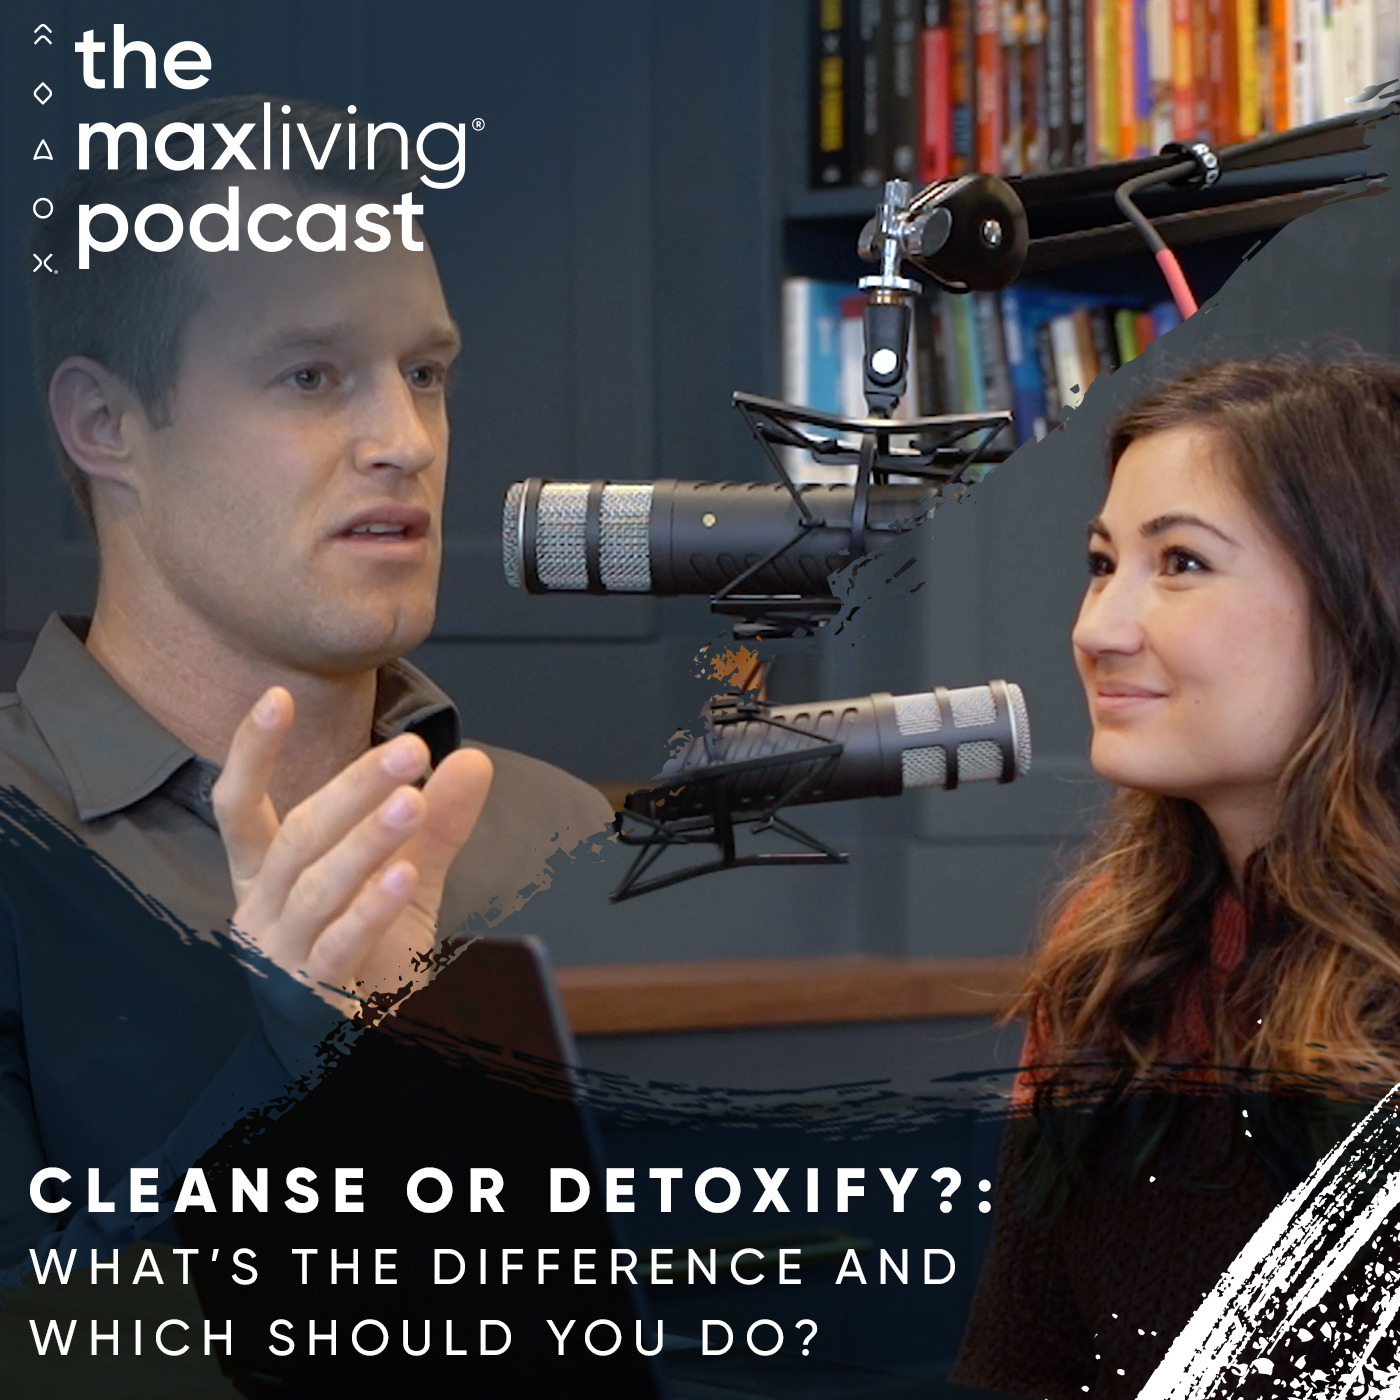 Episode 3 - Cleansing or Detoxify